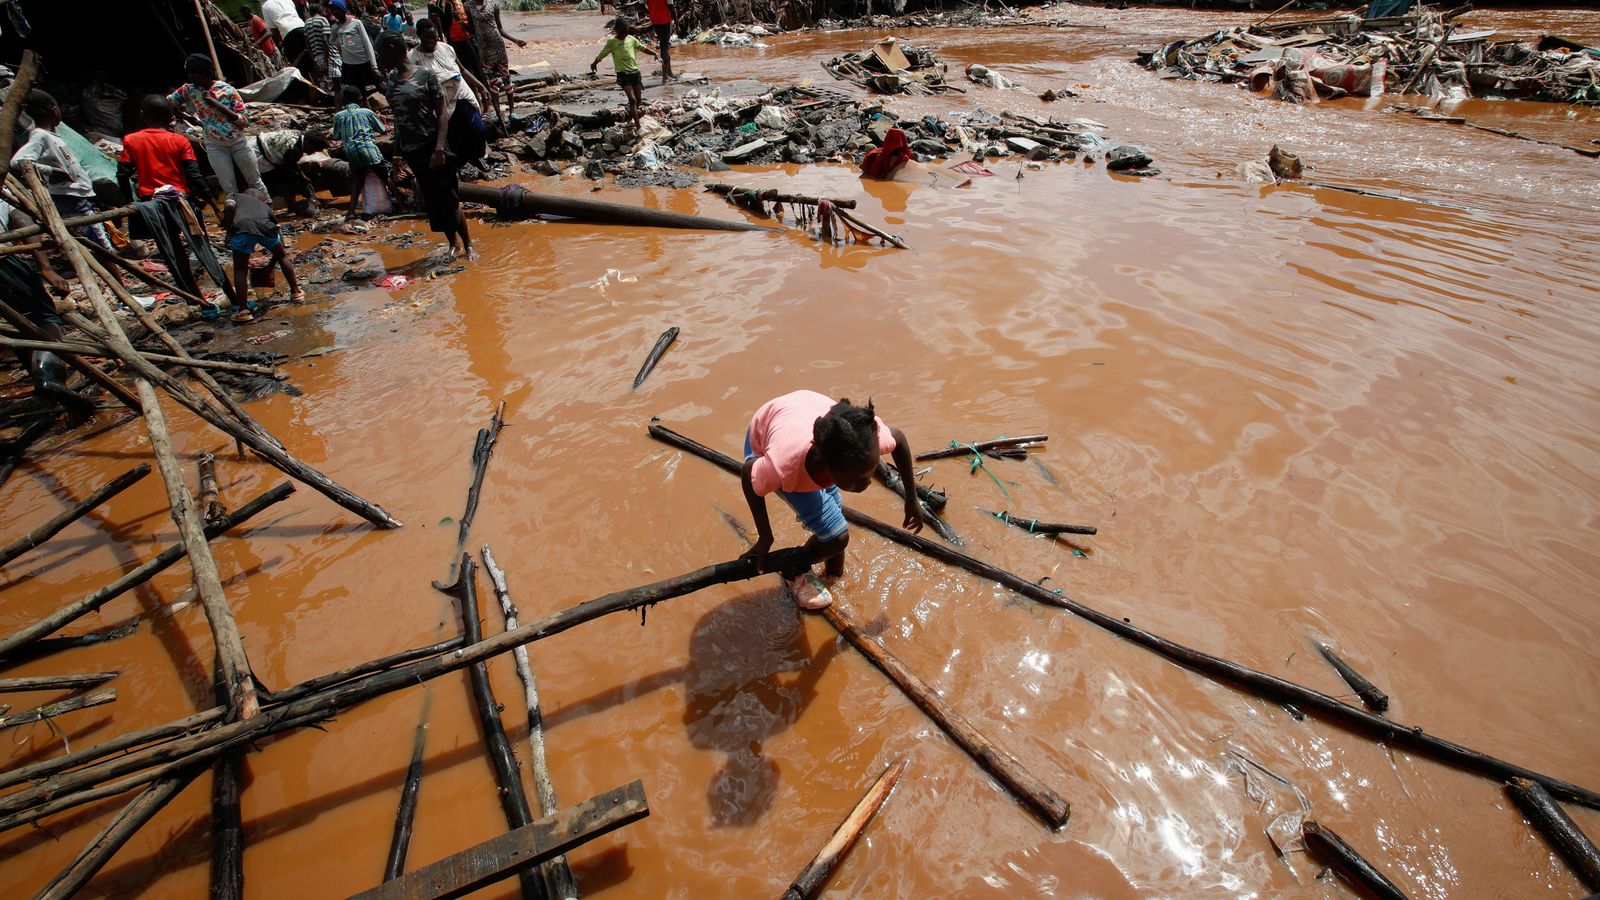 Devastating flooding in east Africa claims dozens of lives and displaces thousands